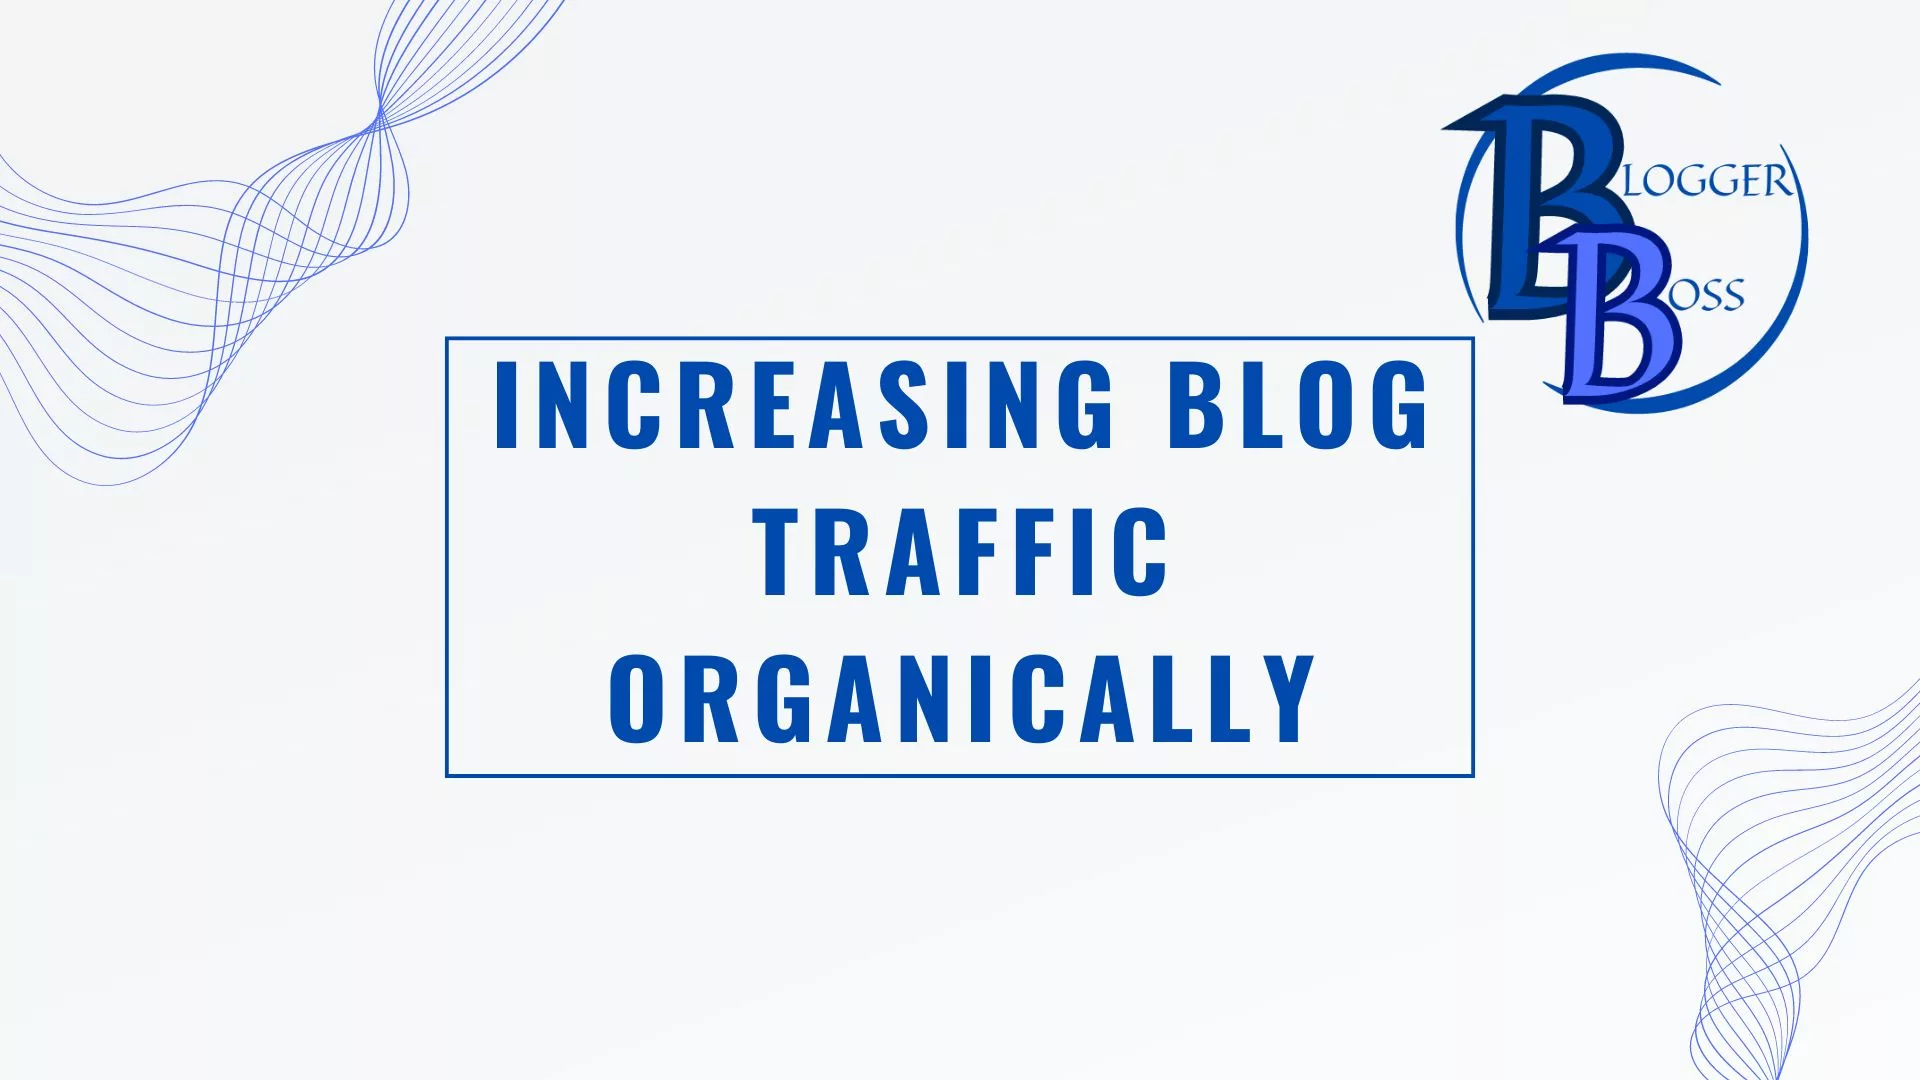 Increasing Blog Traffic Organically written in large blue font on a light blue background.